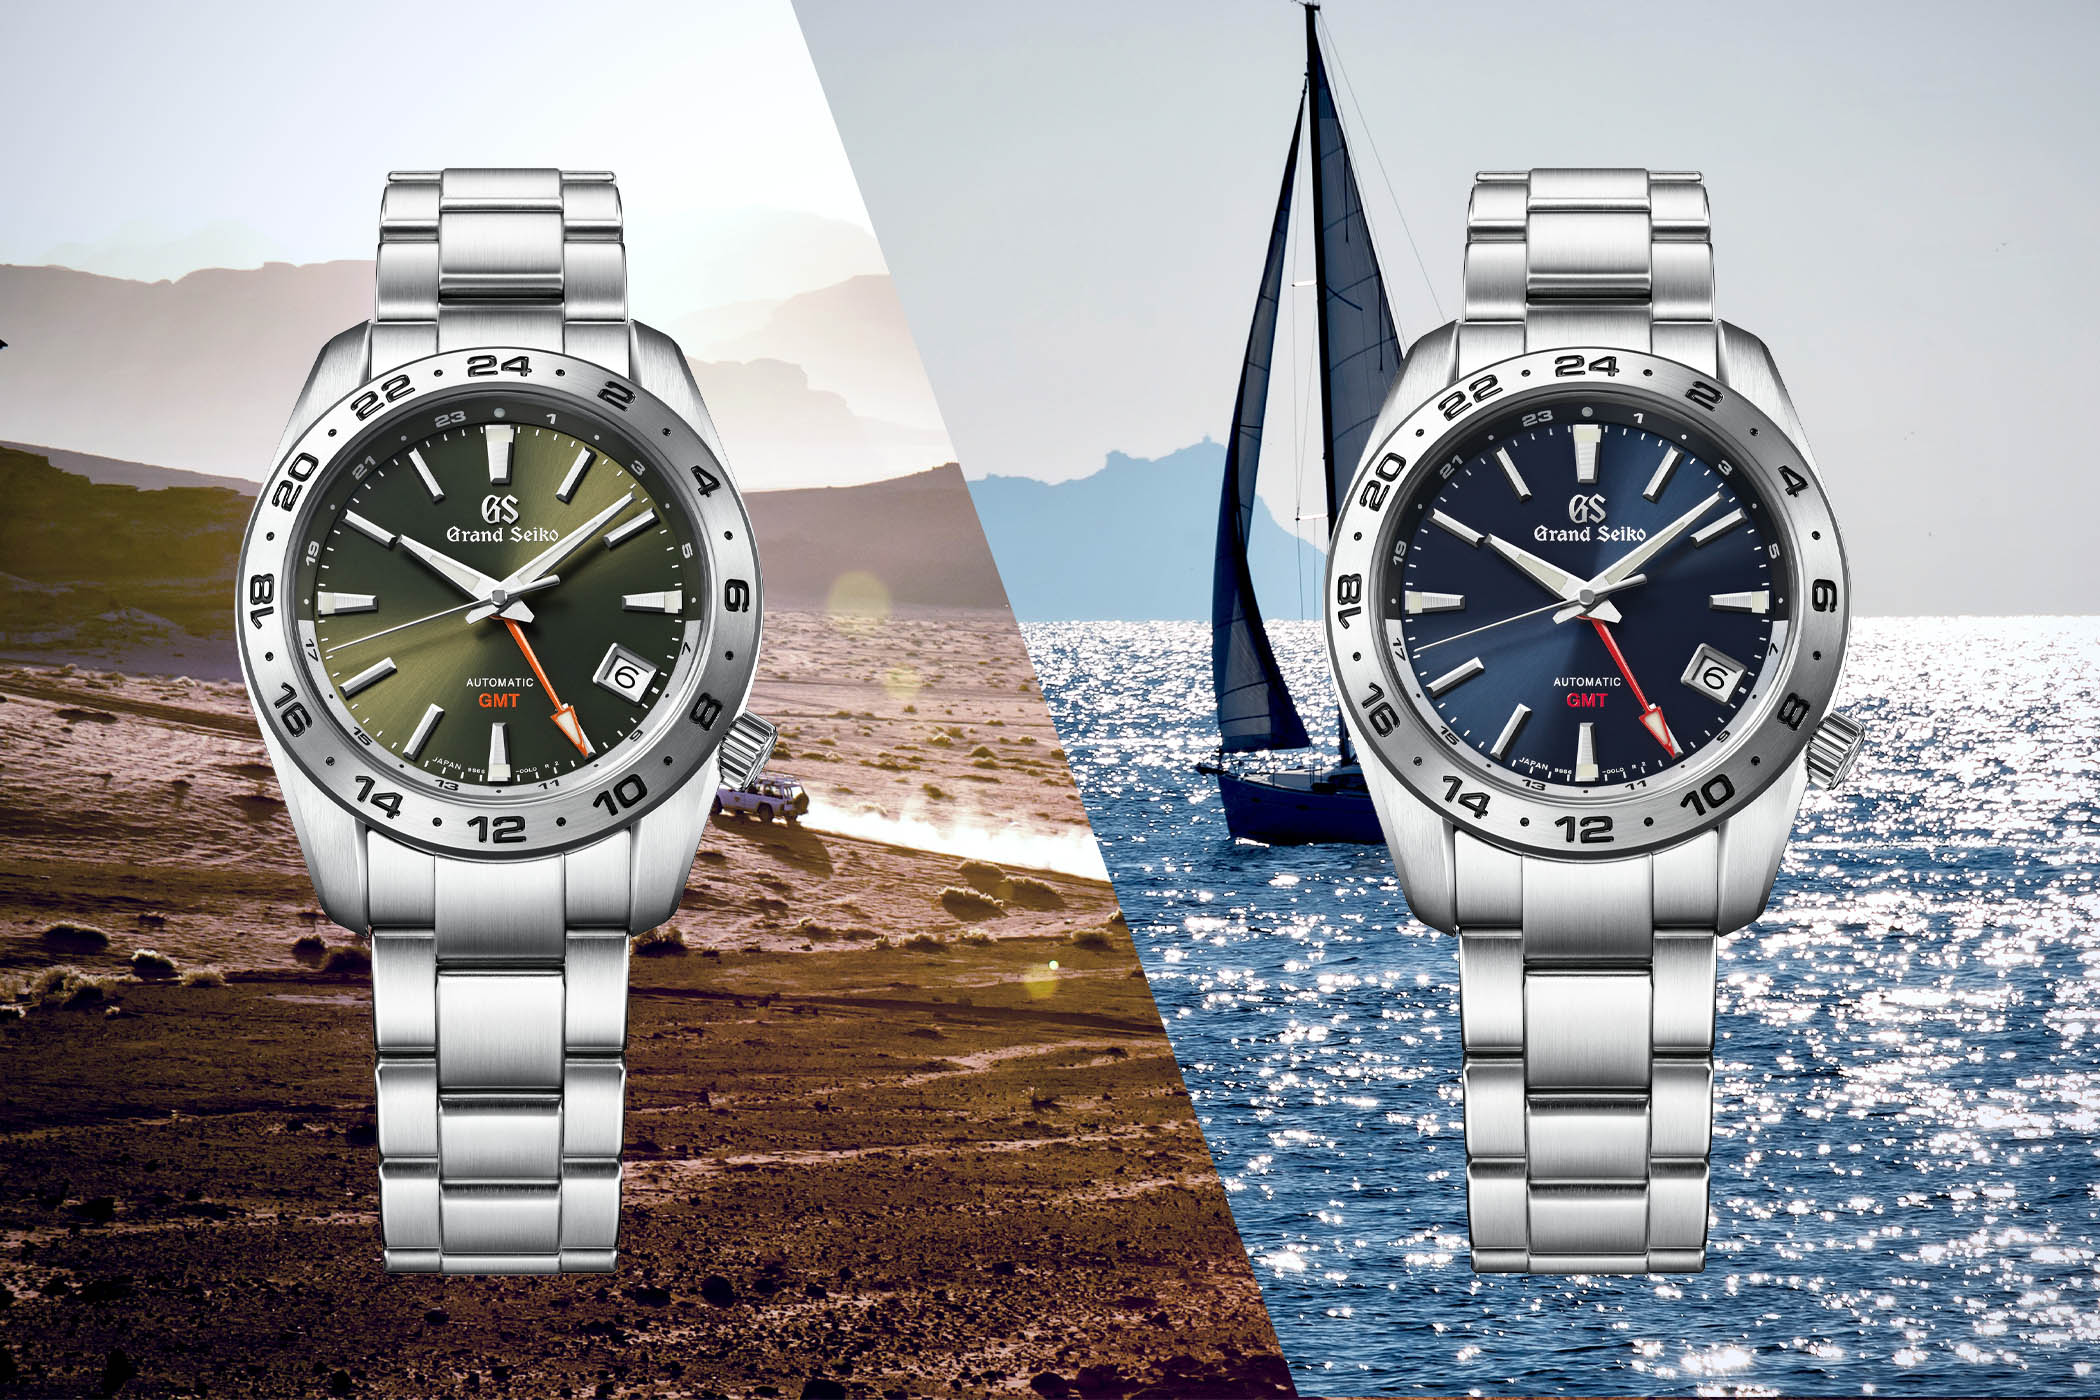 Introducing The Grand Seiko Sport Collection GMT SBGM245 & SBGM247 Watches